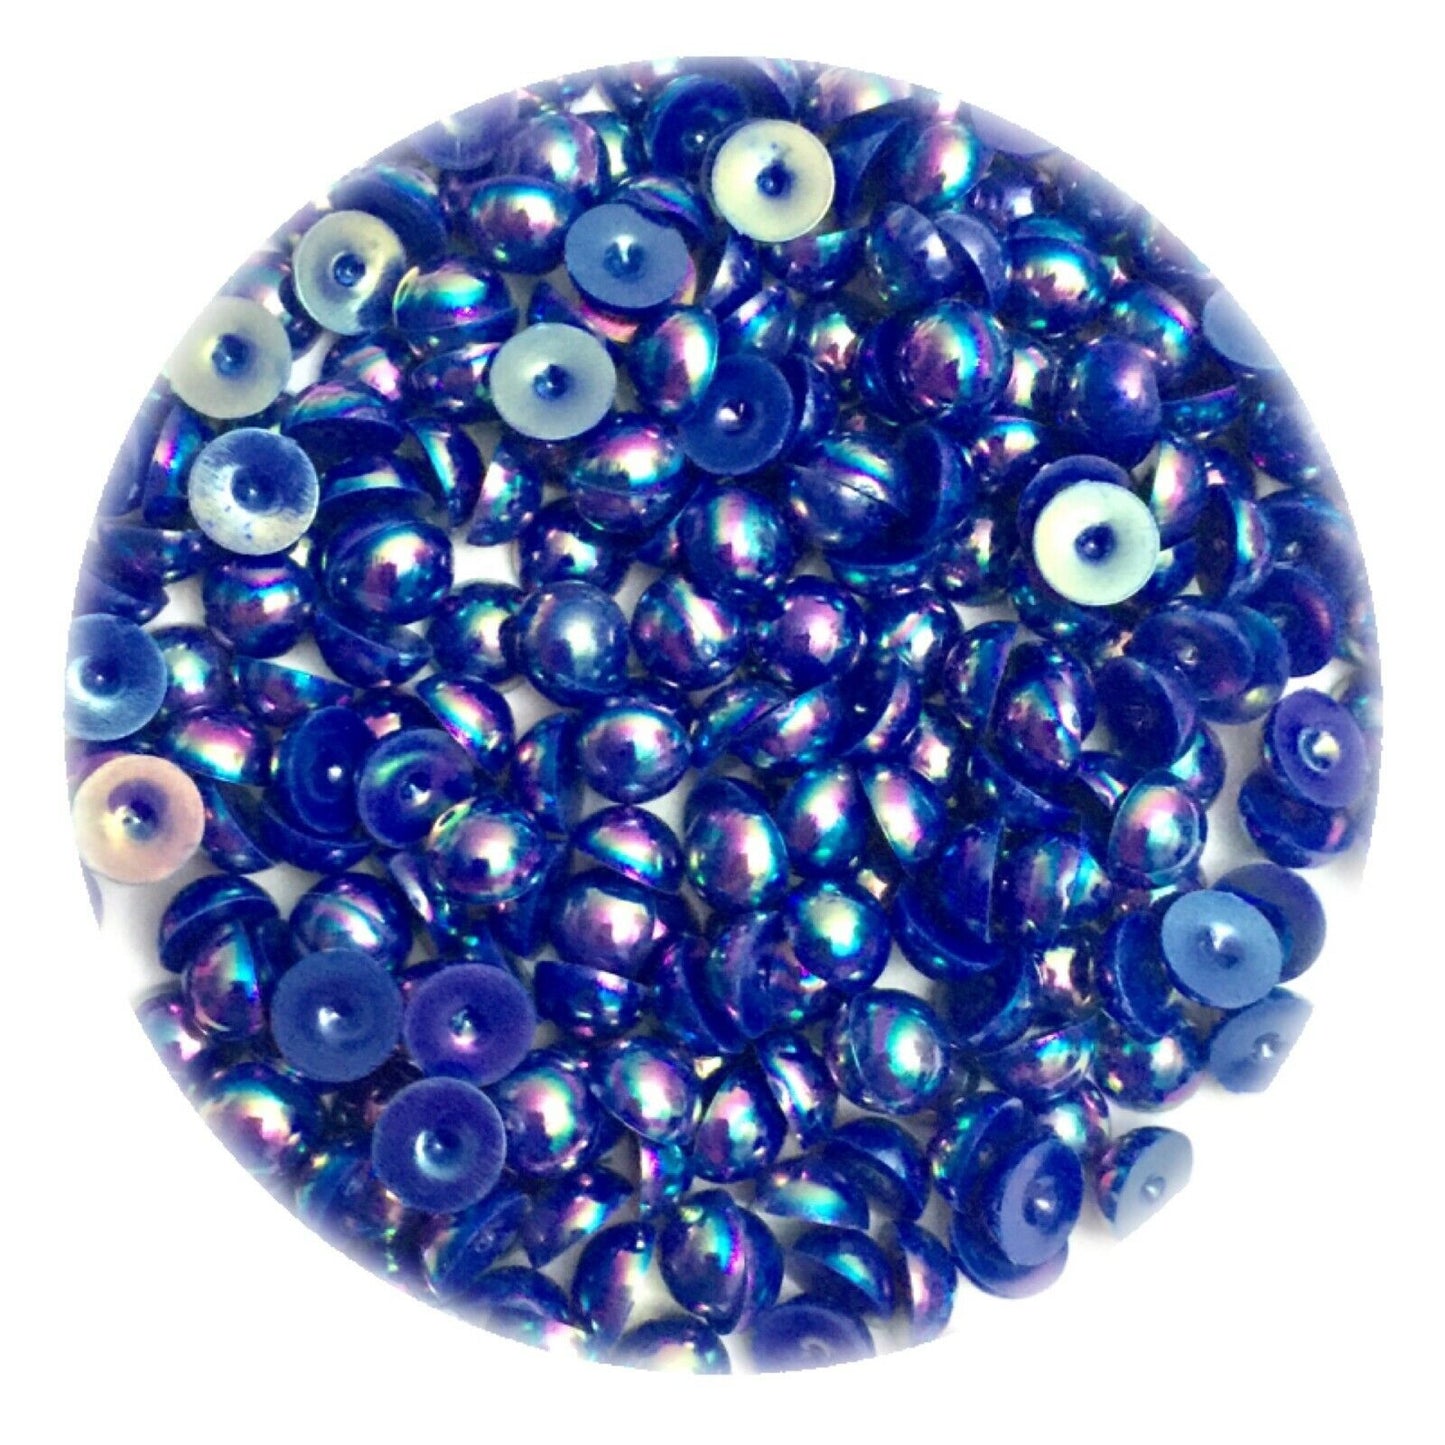 100x Half Pearl 10mm Flat-back Resin Beads - Choose Your Colour